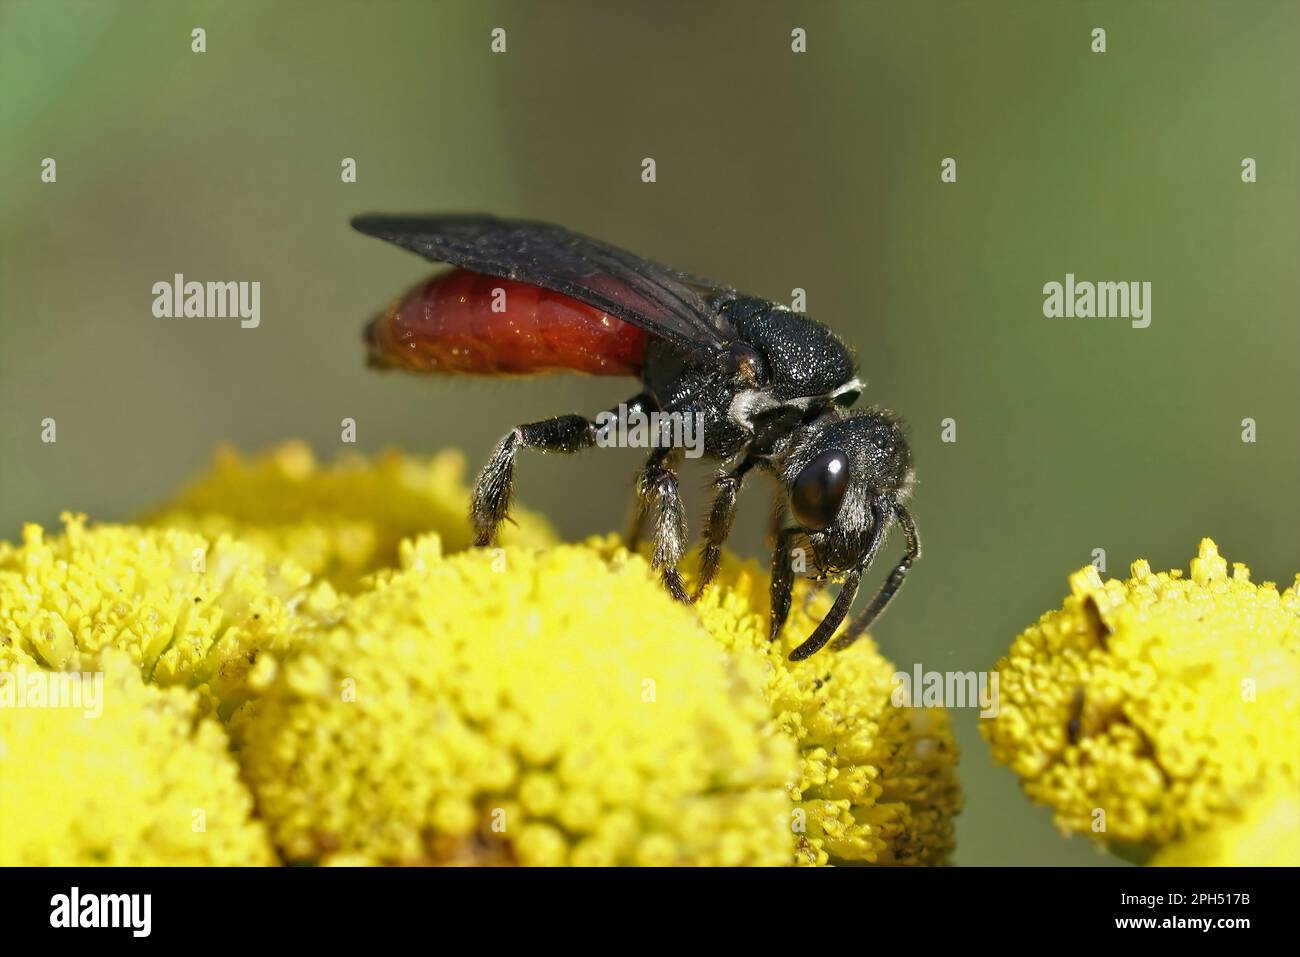 Natural closeup on the large, brilliant red cleptoparasite blood bee, Sphecodes albilabris sitting on yellow Tansy flower in the field Stock Photo